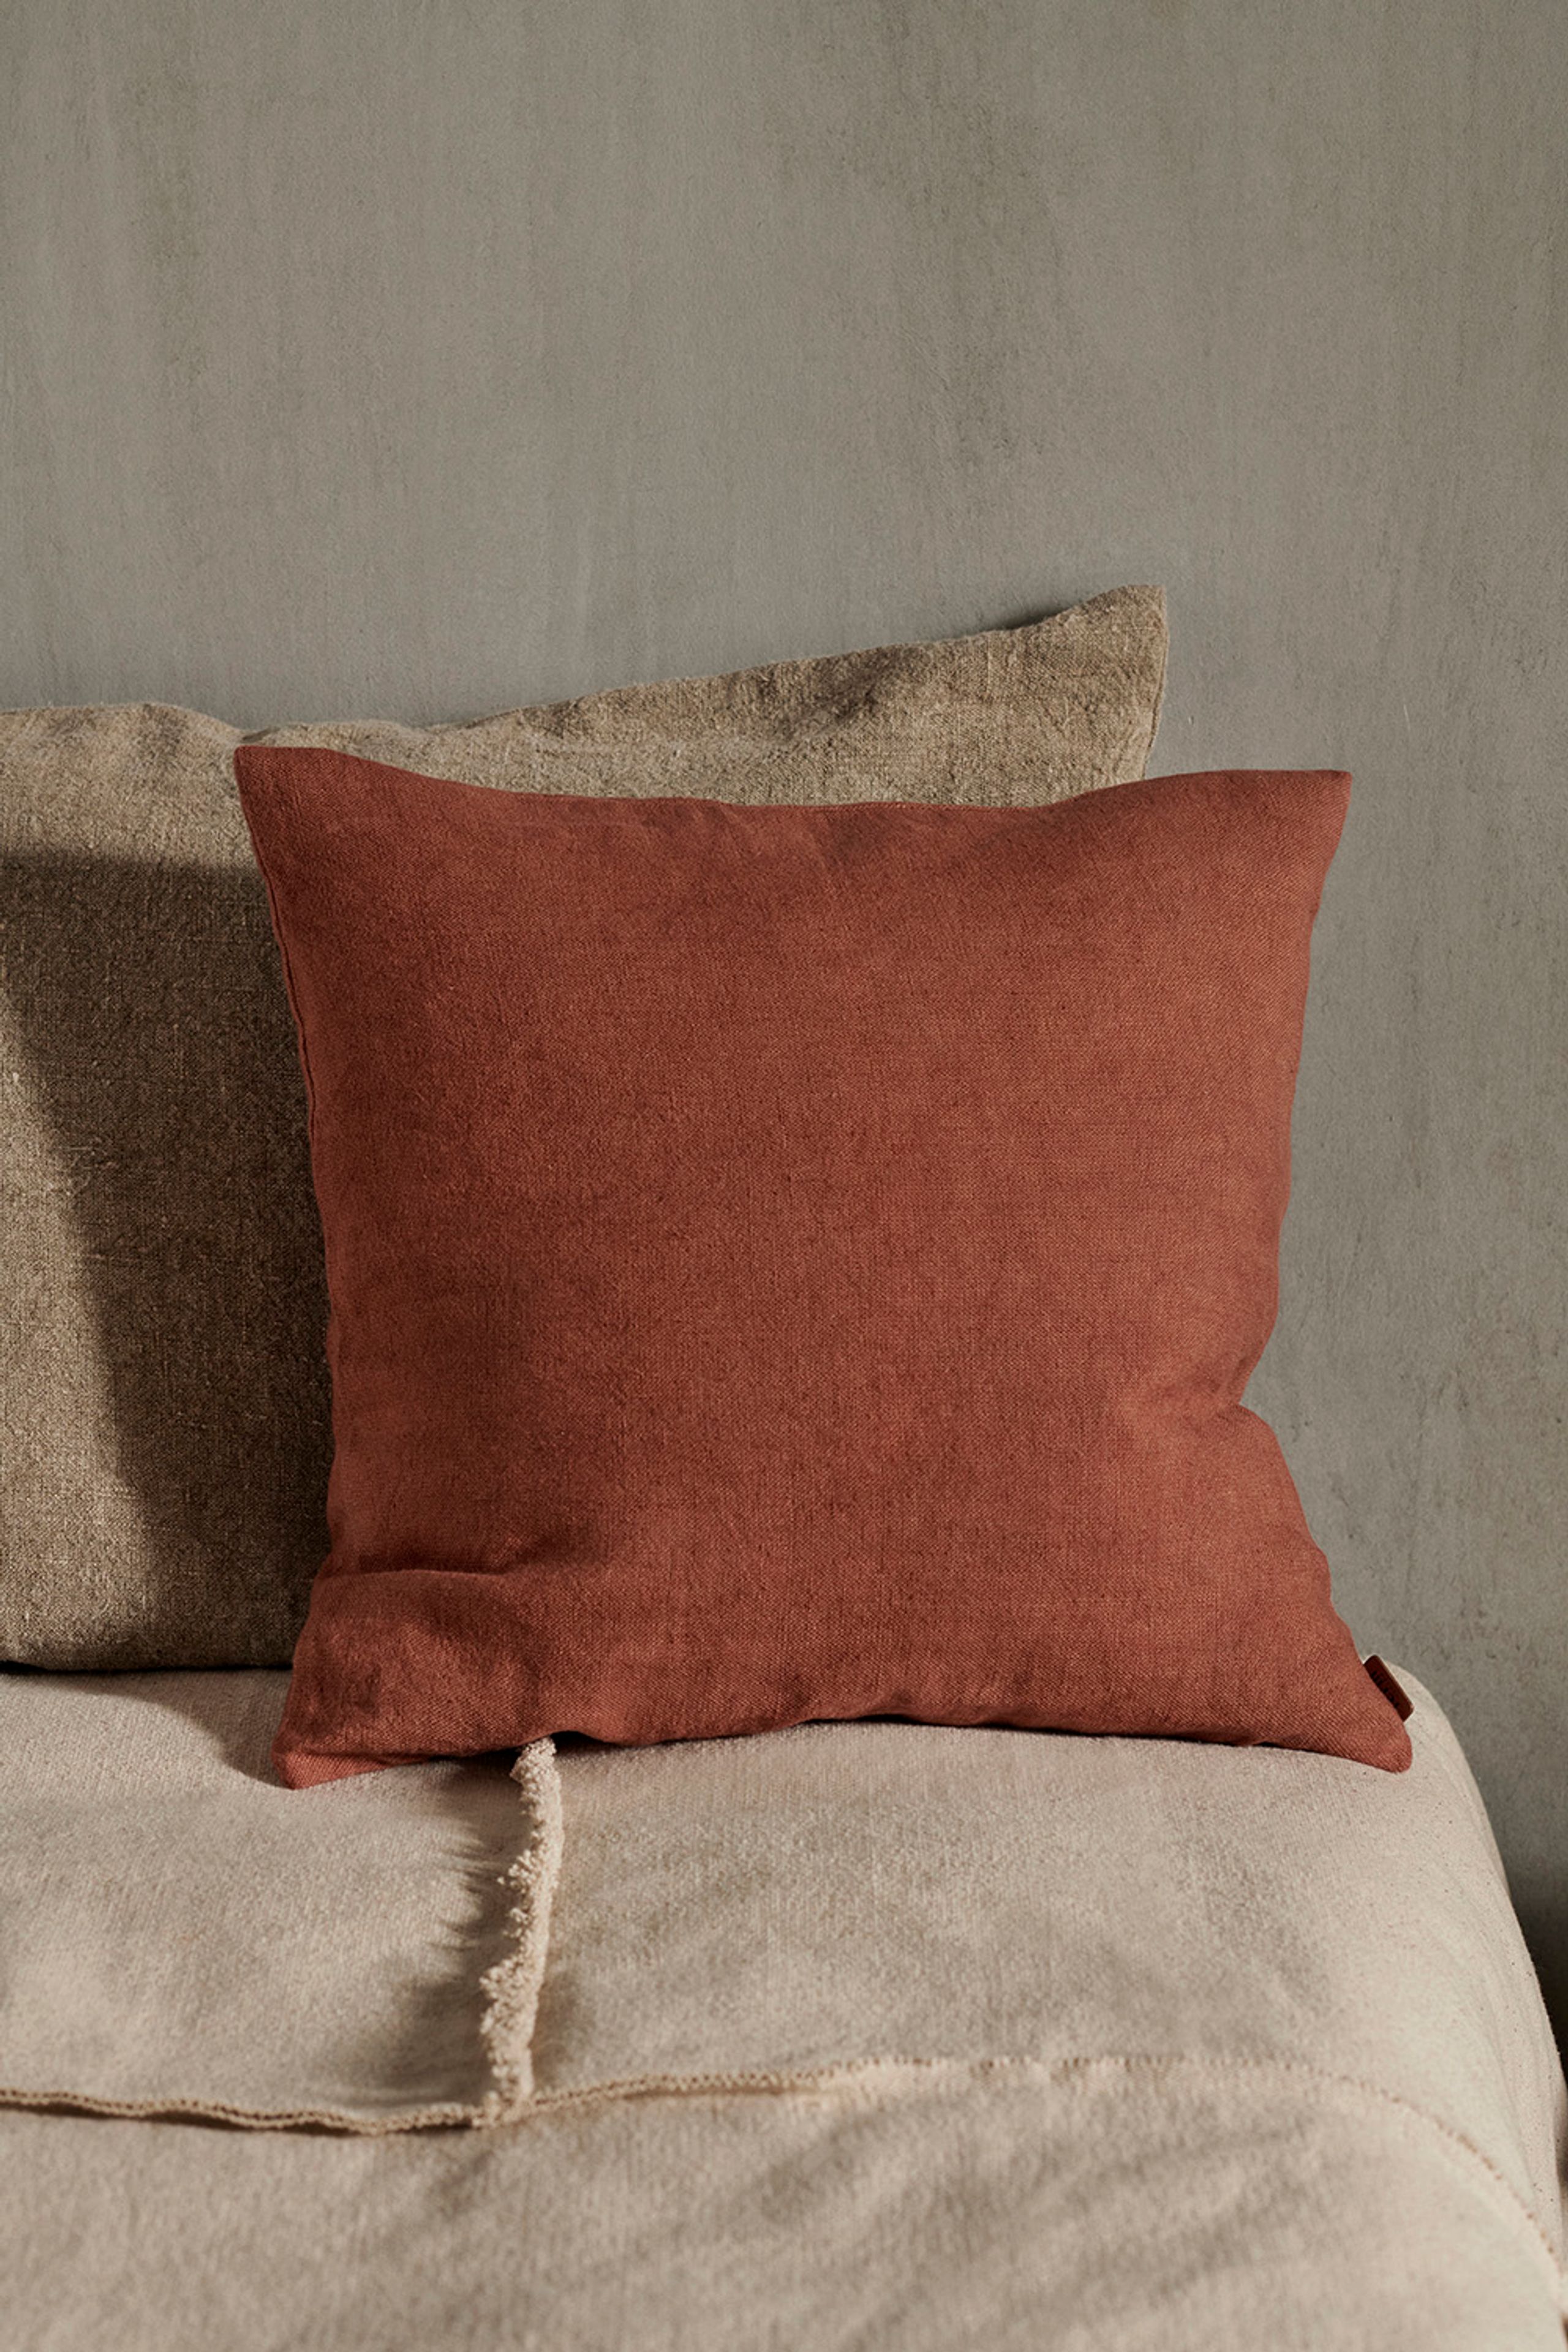 Ferm Living - Pudebetræk - Heavy Linen Cushion Cover - Berry Red